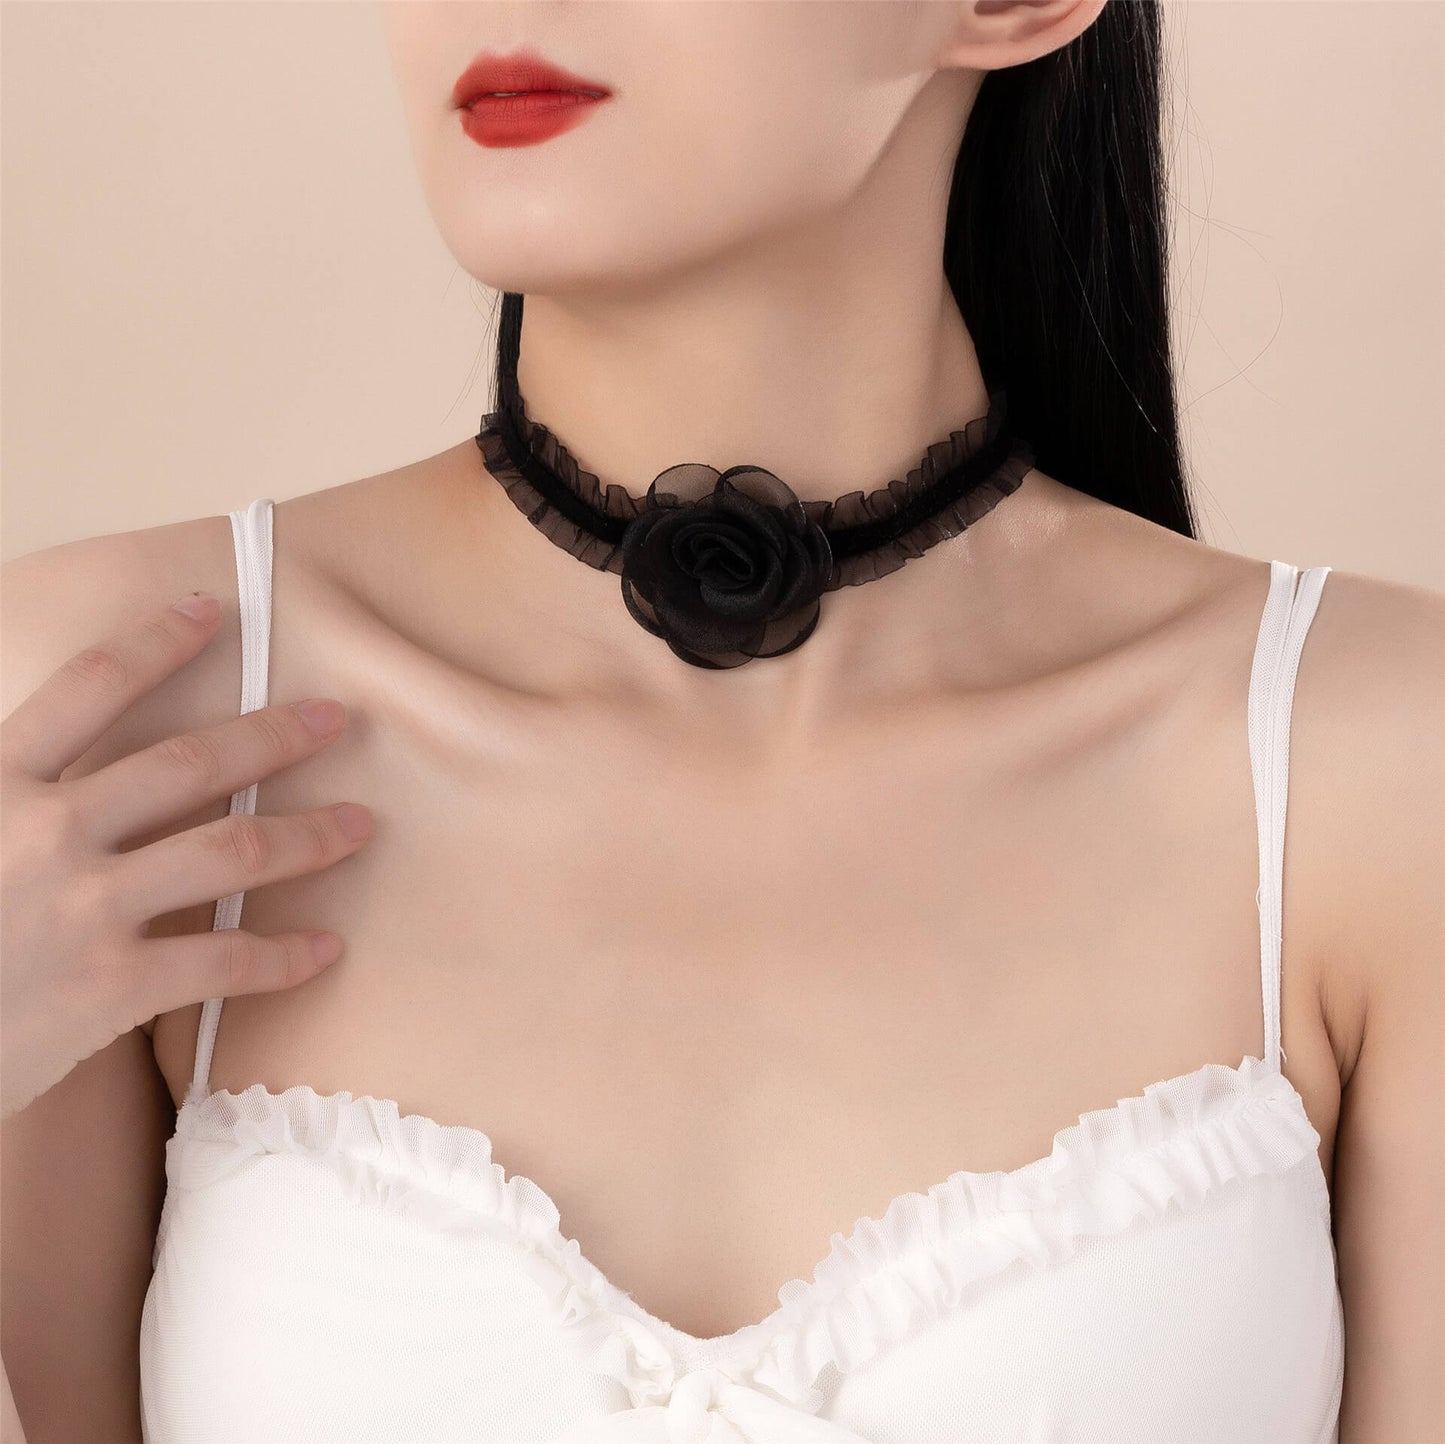 Femboy with Lace Choker With Flower - Femboy Fashion